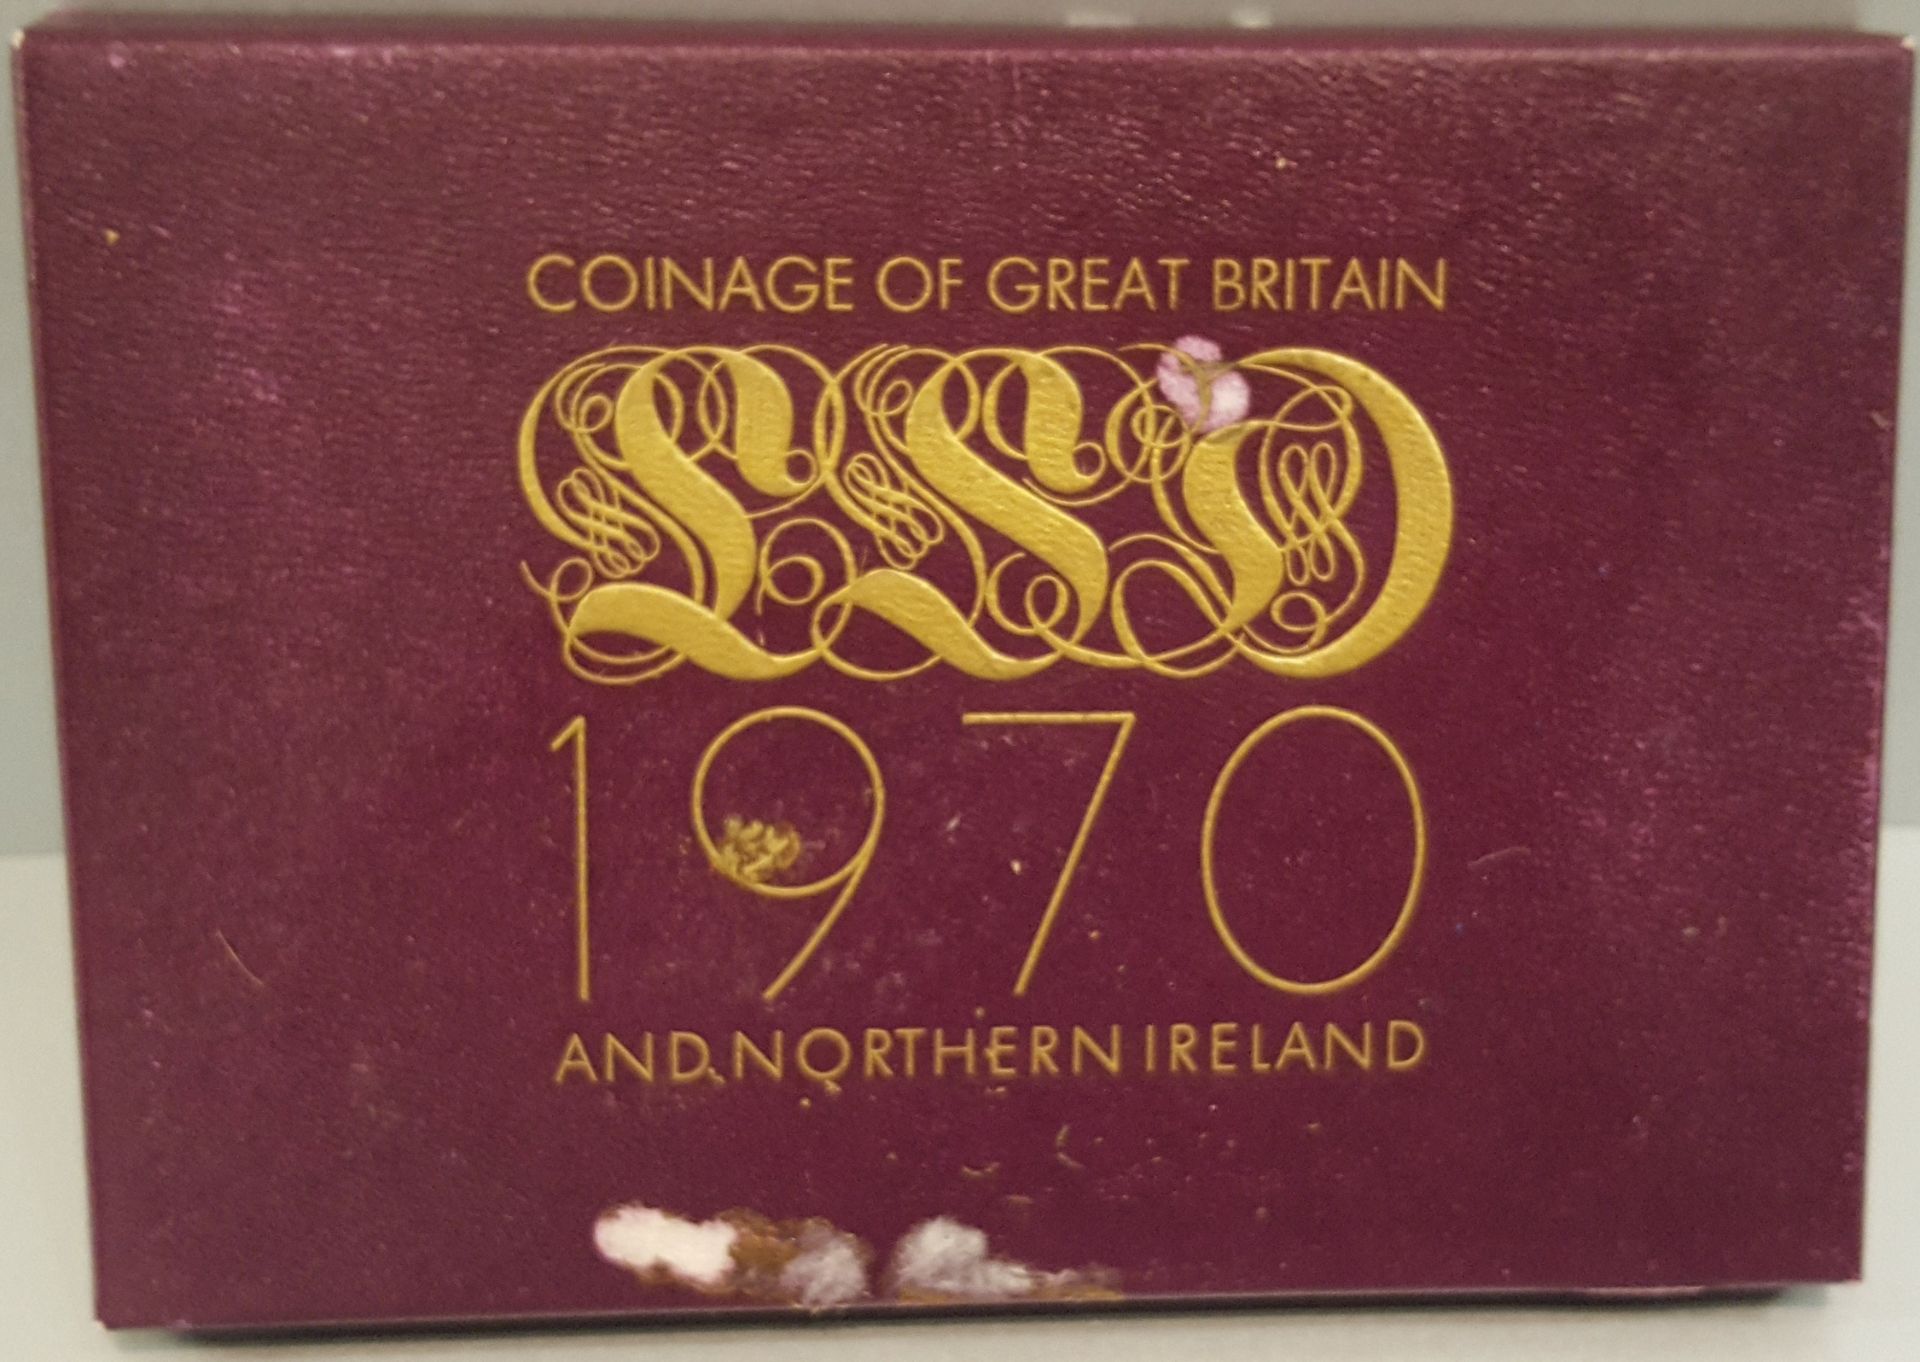 Collectable Coins GB & Northern Ireland Proof Set 1970 - Image 3 of 4